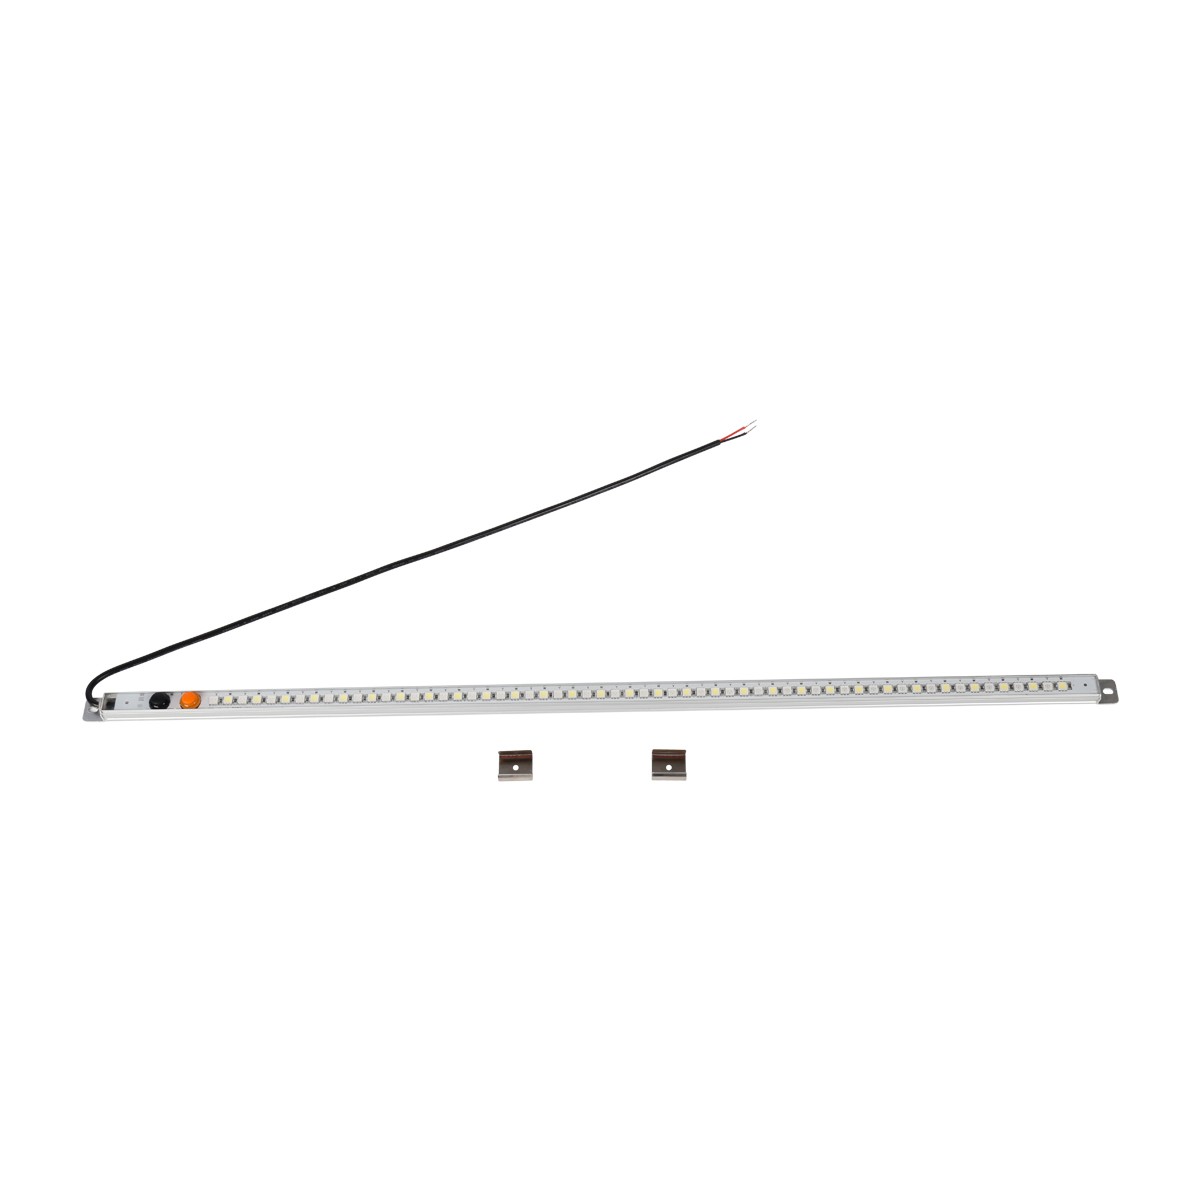 Silver 5050 dual-switch LED hard light bar low voltage 12V with magnet, easy to install and simple L